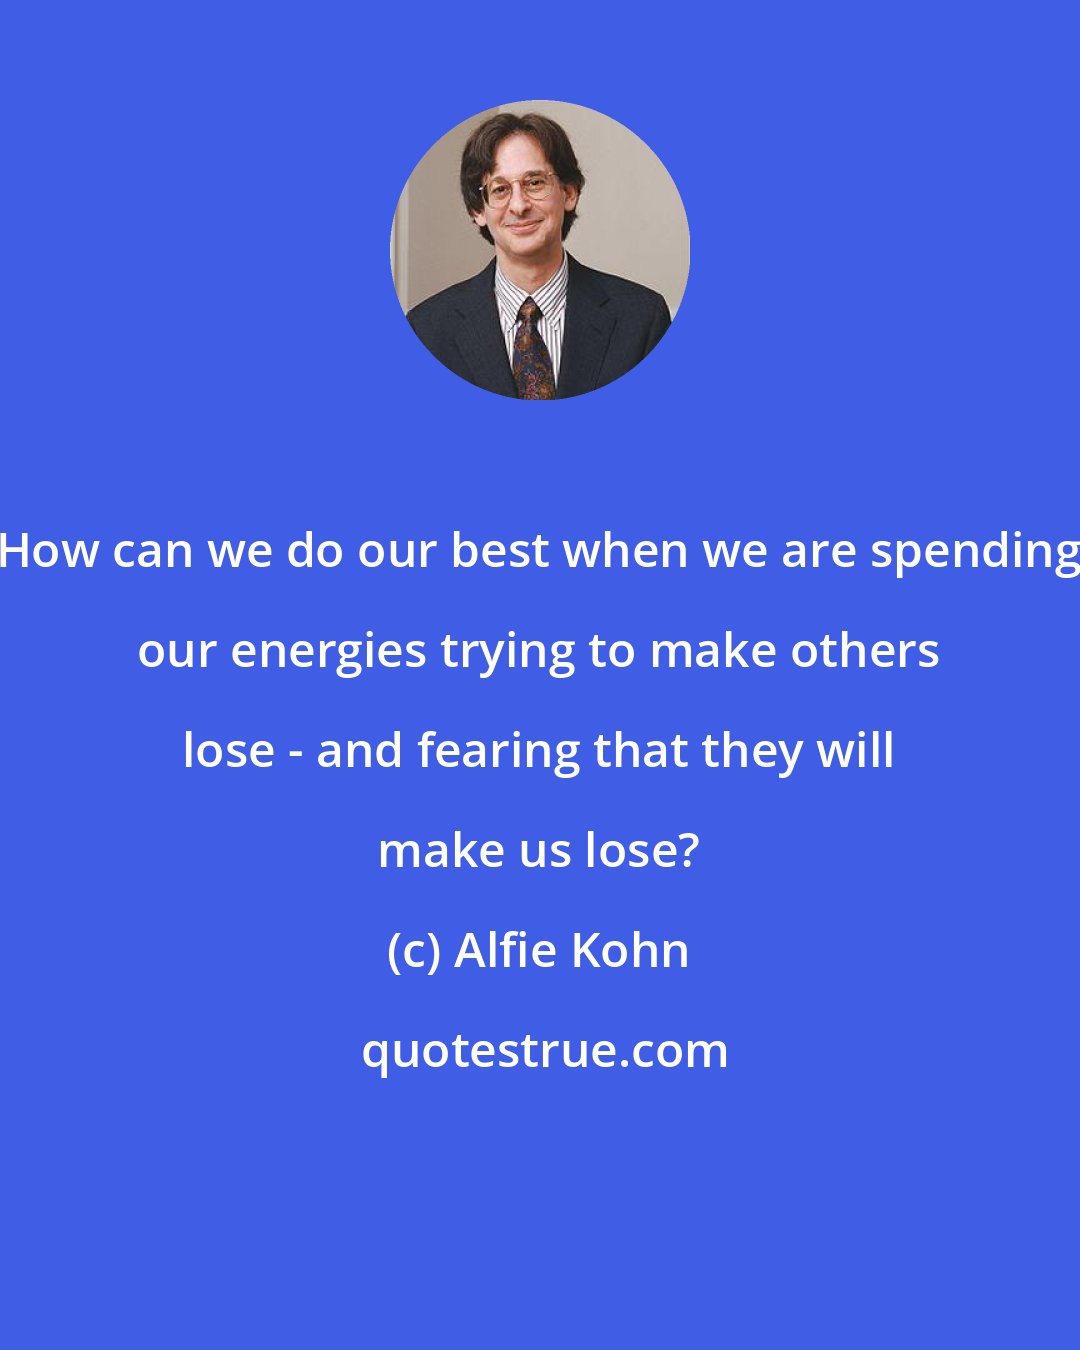 Alfie Kohn: How can we do our best when we are spending our energies trying to make others lose - and fearing that they will make us lose?